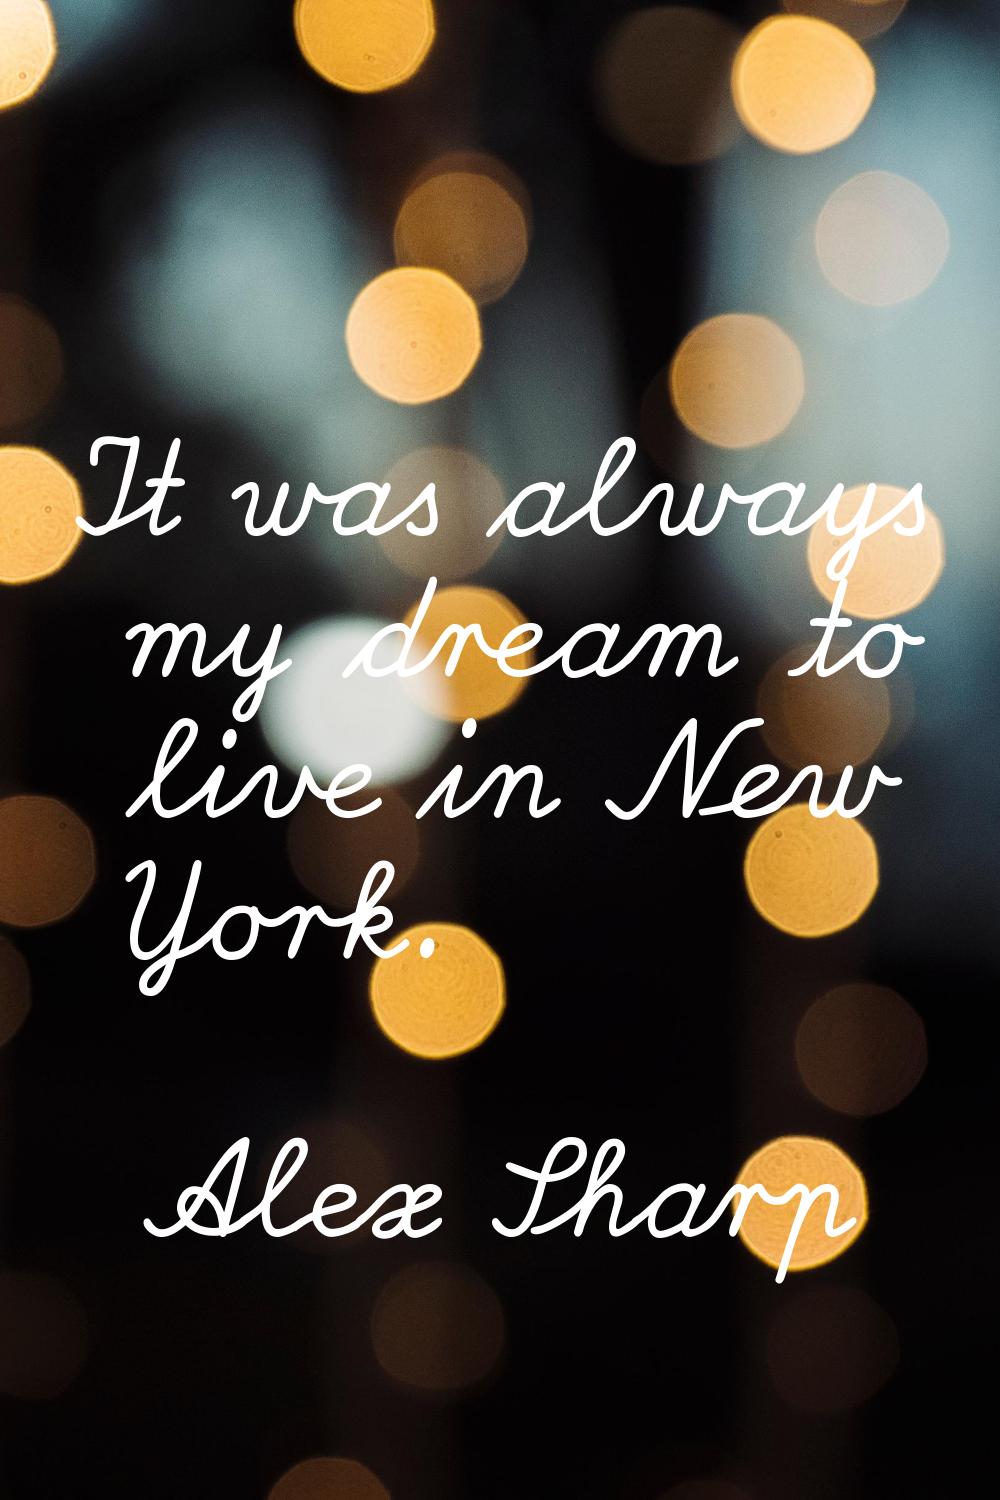 It was always my dream to live in New York.